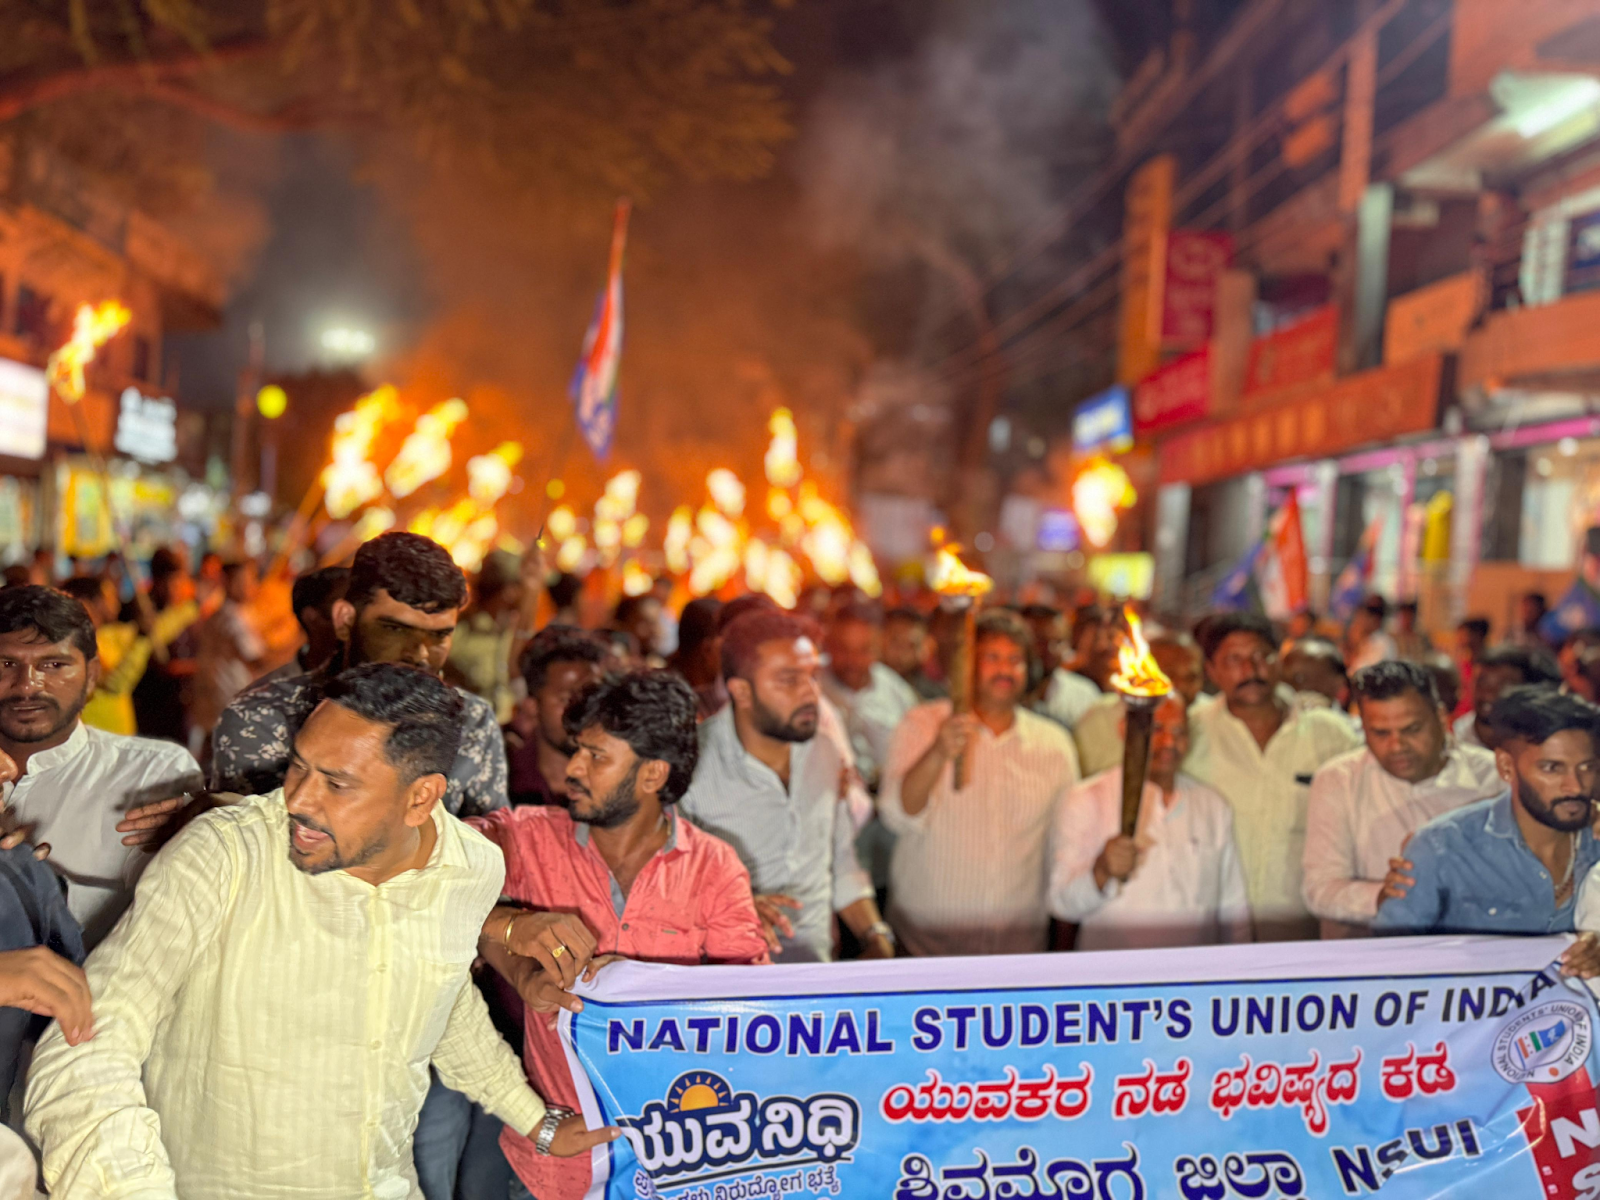 YuvaNidhi Yojane ,ಯುವನಿಧಿ ಯೋಜನೆ, ಯುವ ಜ್ಯೋತಿ ಜಾಥಾ , YuvaNidhi Yojane |  Minister takes out procession in Shivamogga city with a torch Do you know what's special?